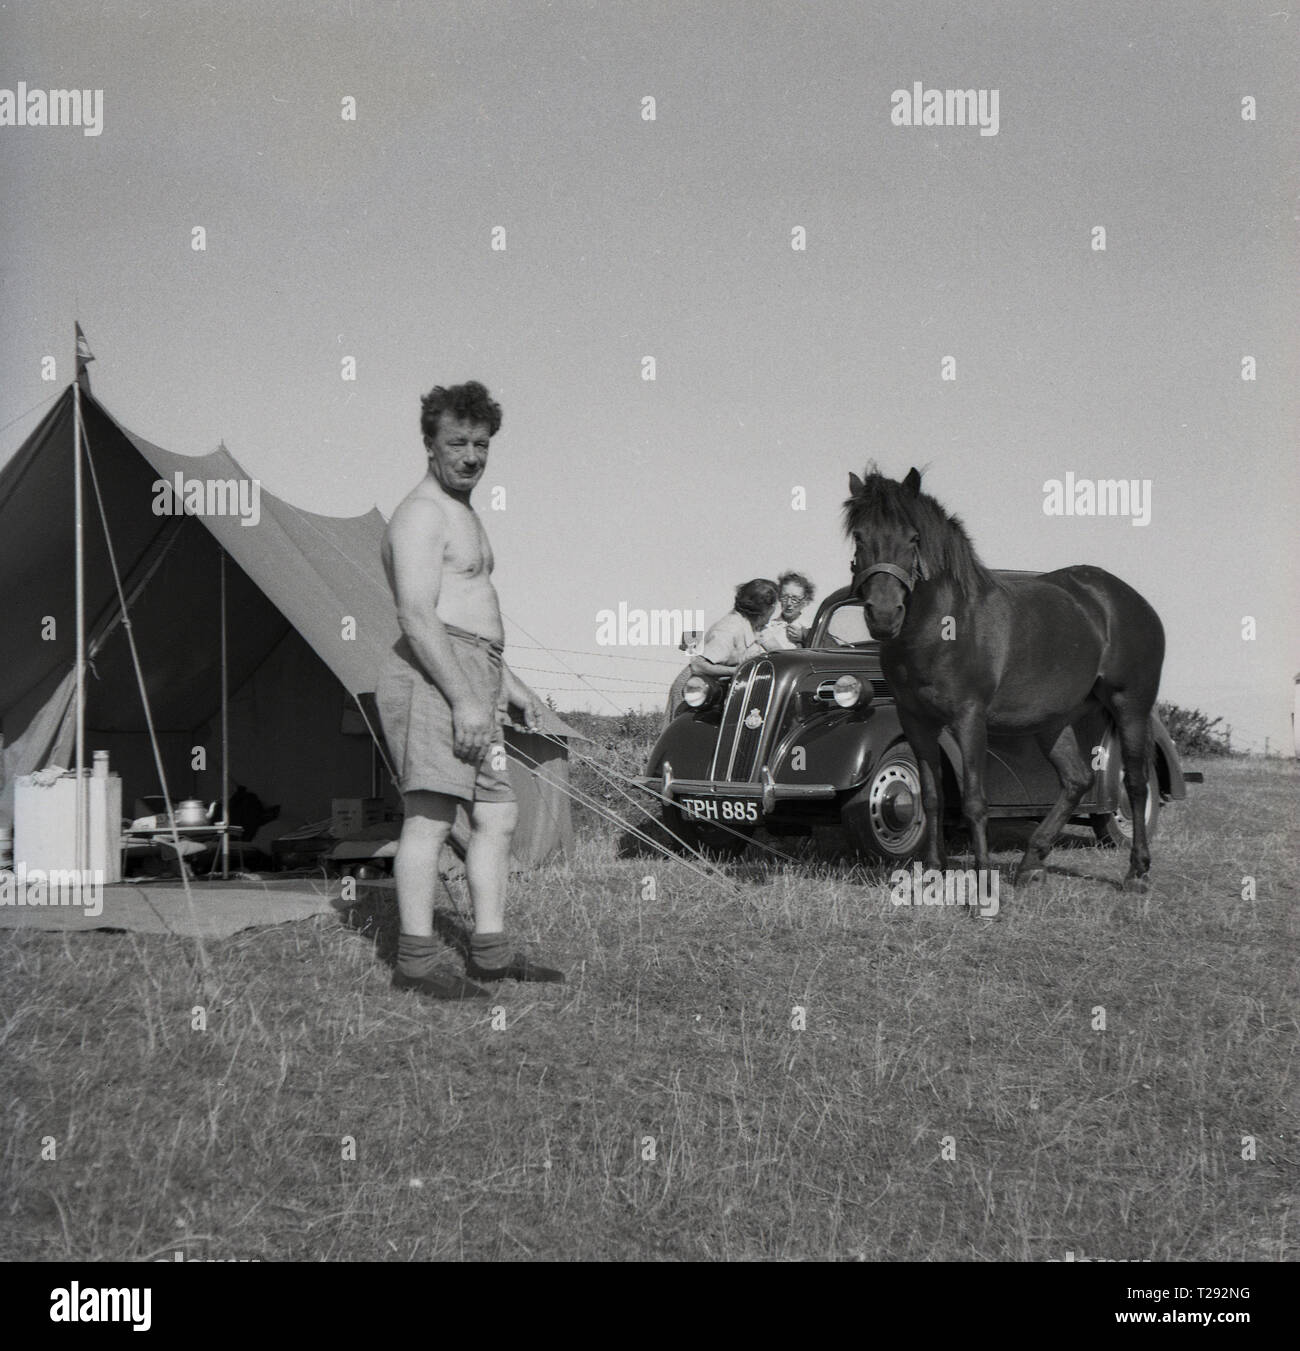 1950s, historical, camping in an open field, a retired army man standing outside in his tent with a surprise visitor, a horse, England, UK. Stock Photo